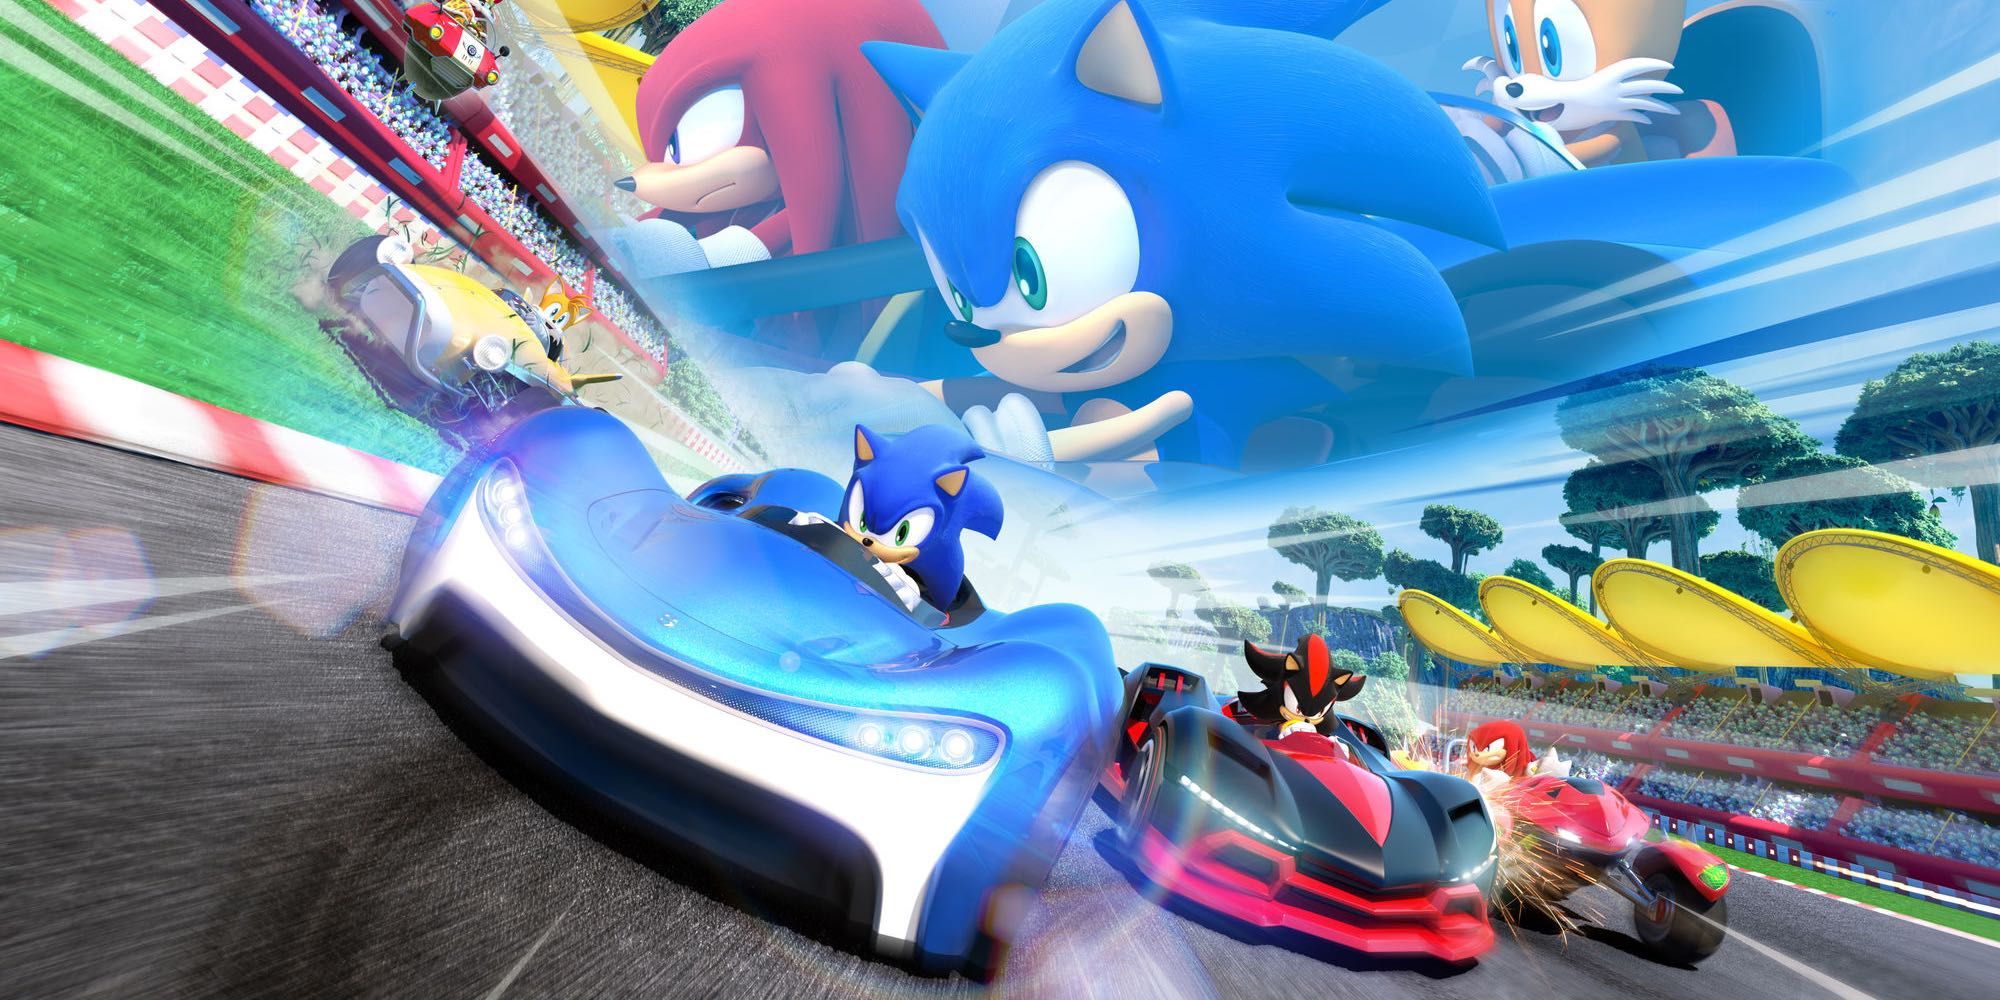 It's promotional art from the Team Sonic Racing game.